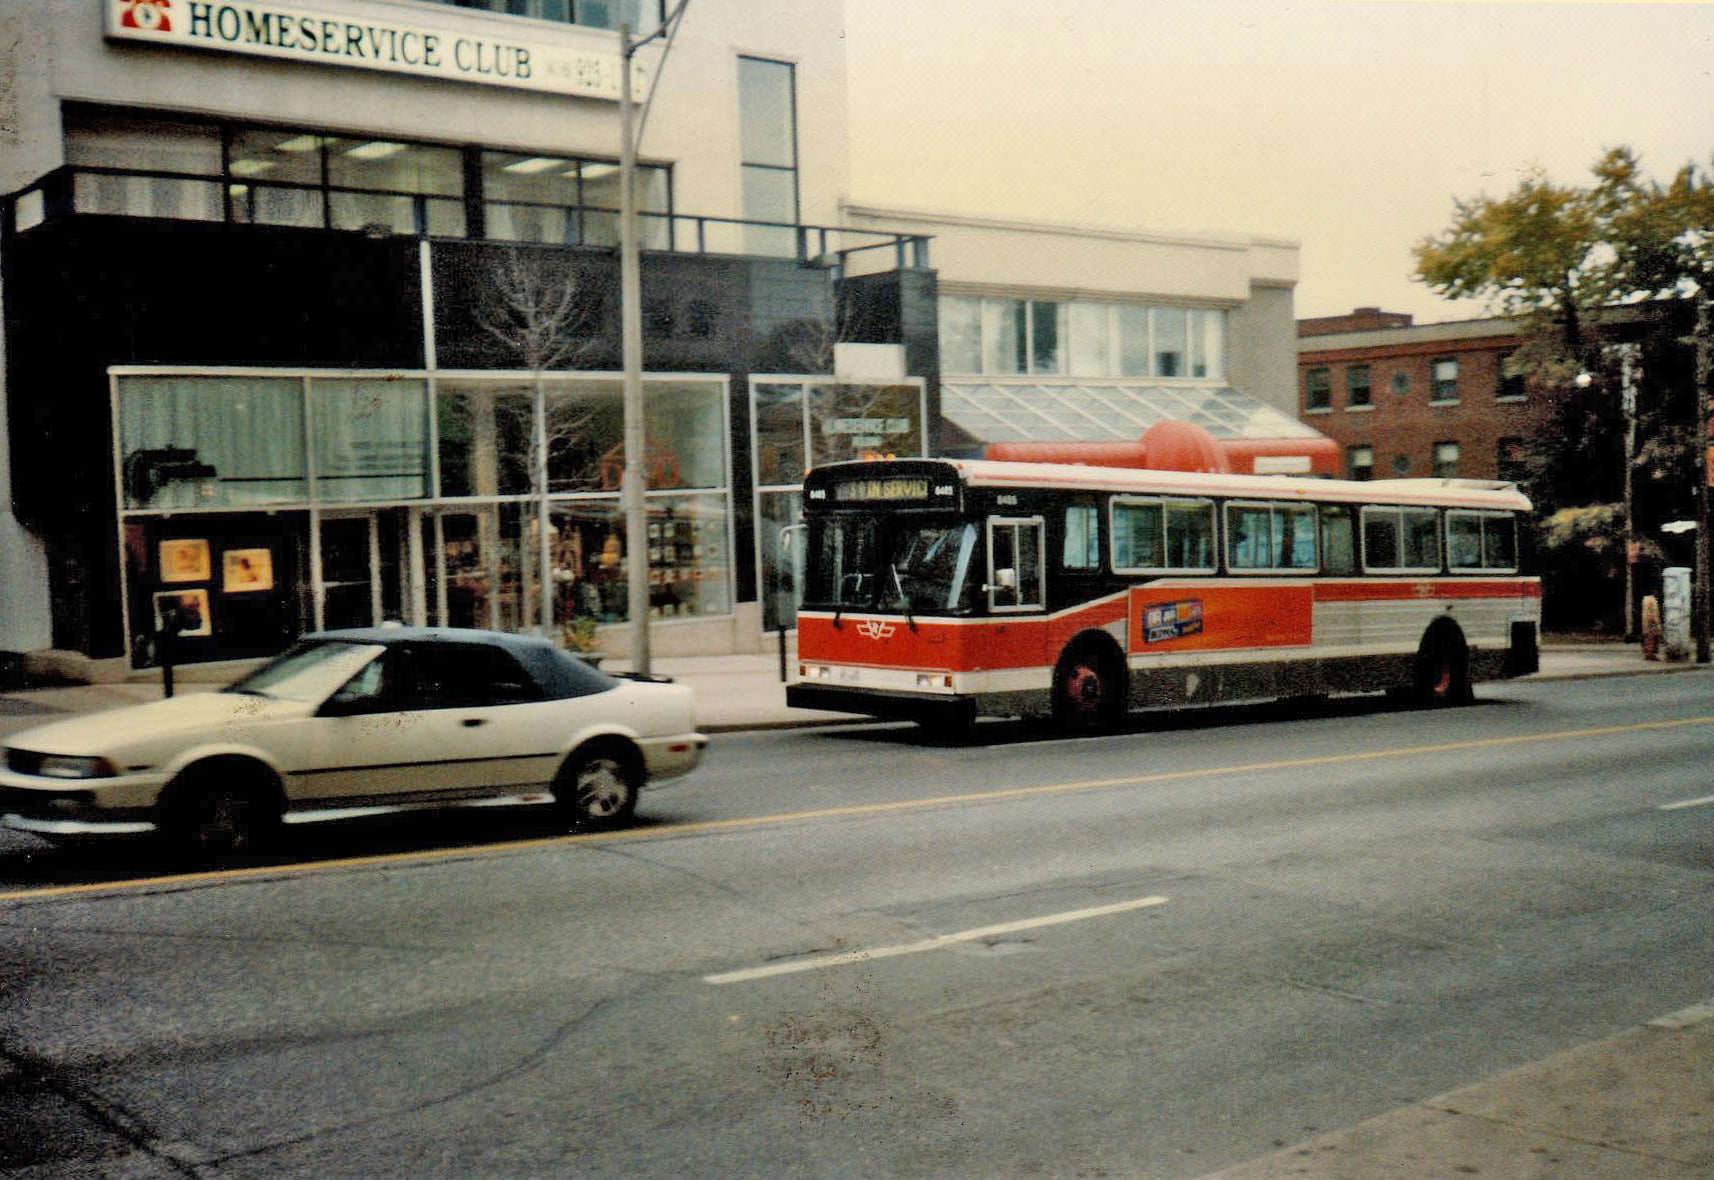 TTC D901 on shuttle bus service, northbound on Yonge St. at Woodlawn Ave., September 1997.